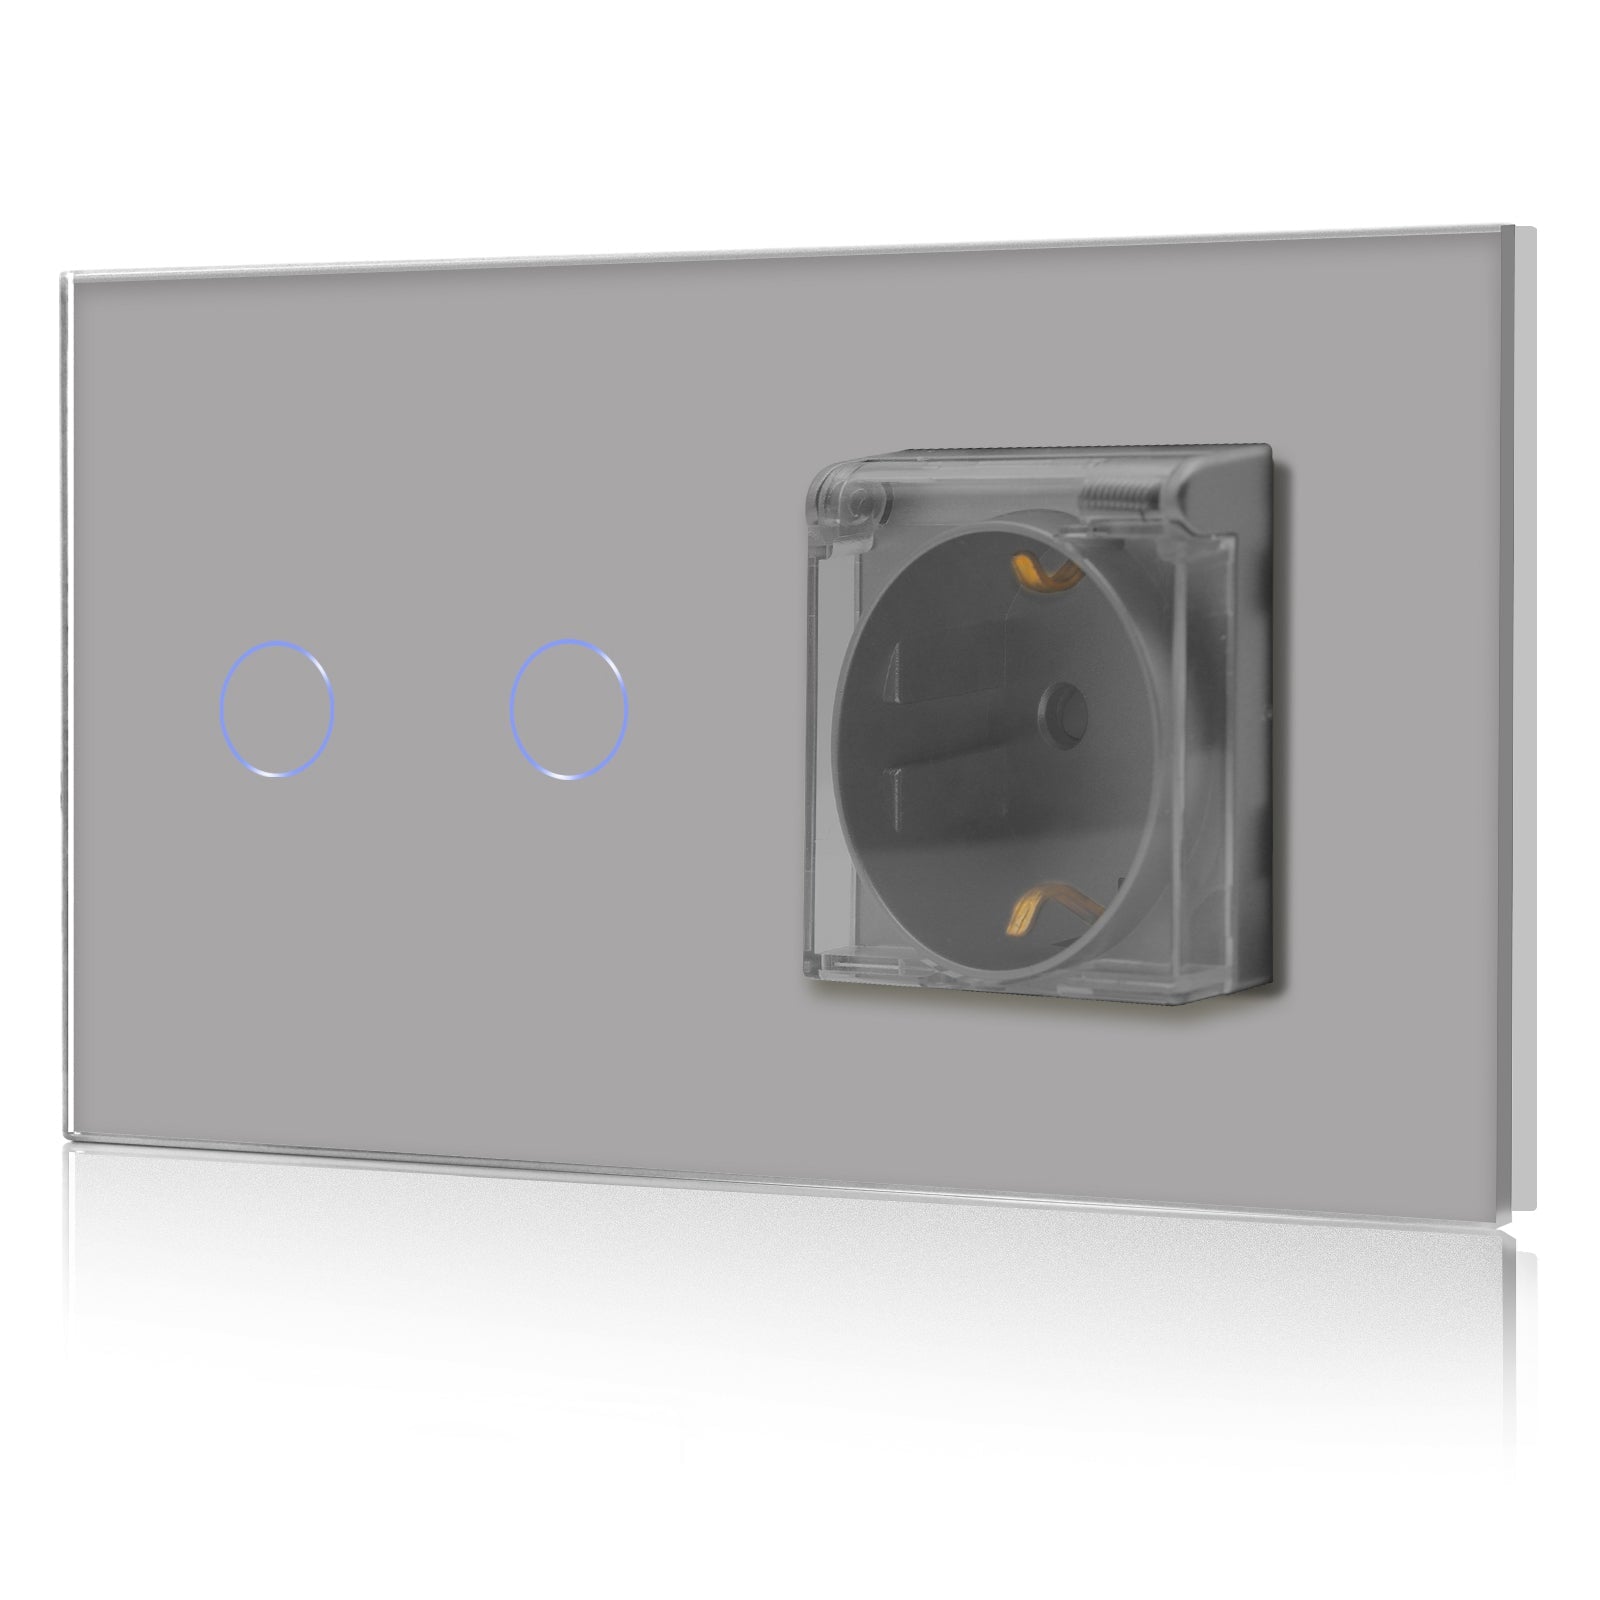 Bseed 1/2/3 Gang 1/2/3 Way Touch Light Switch with Waterproof Eu Socket 300W Wall Plates & Covers Bseedswitch Grey 2 Gang 1 Way